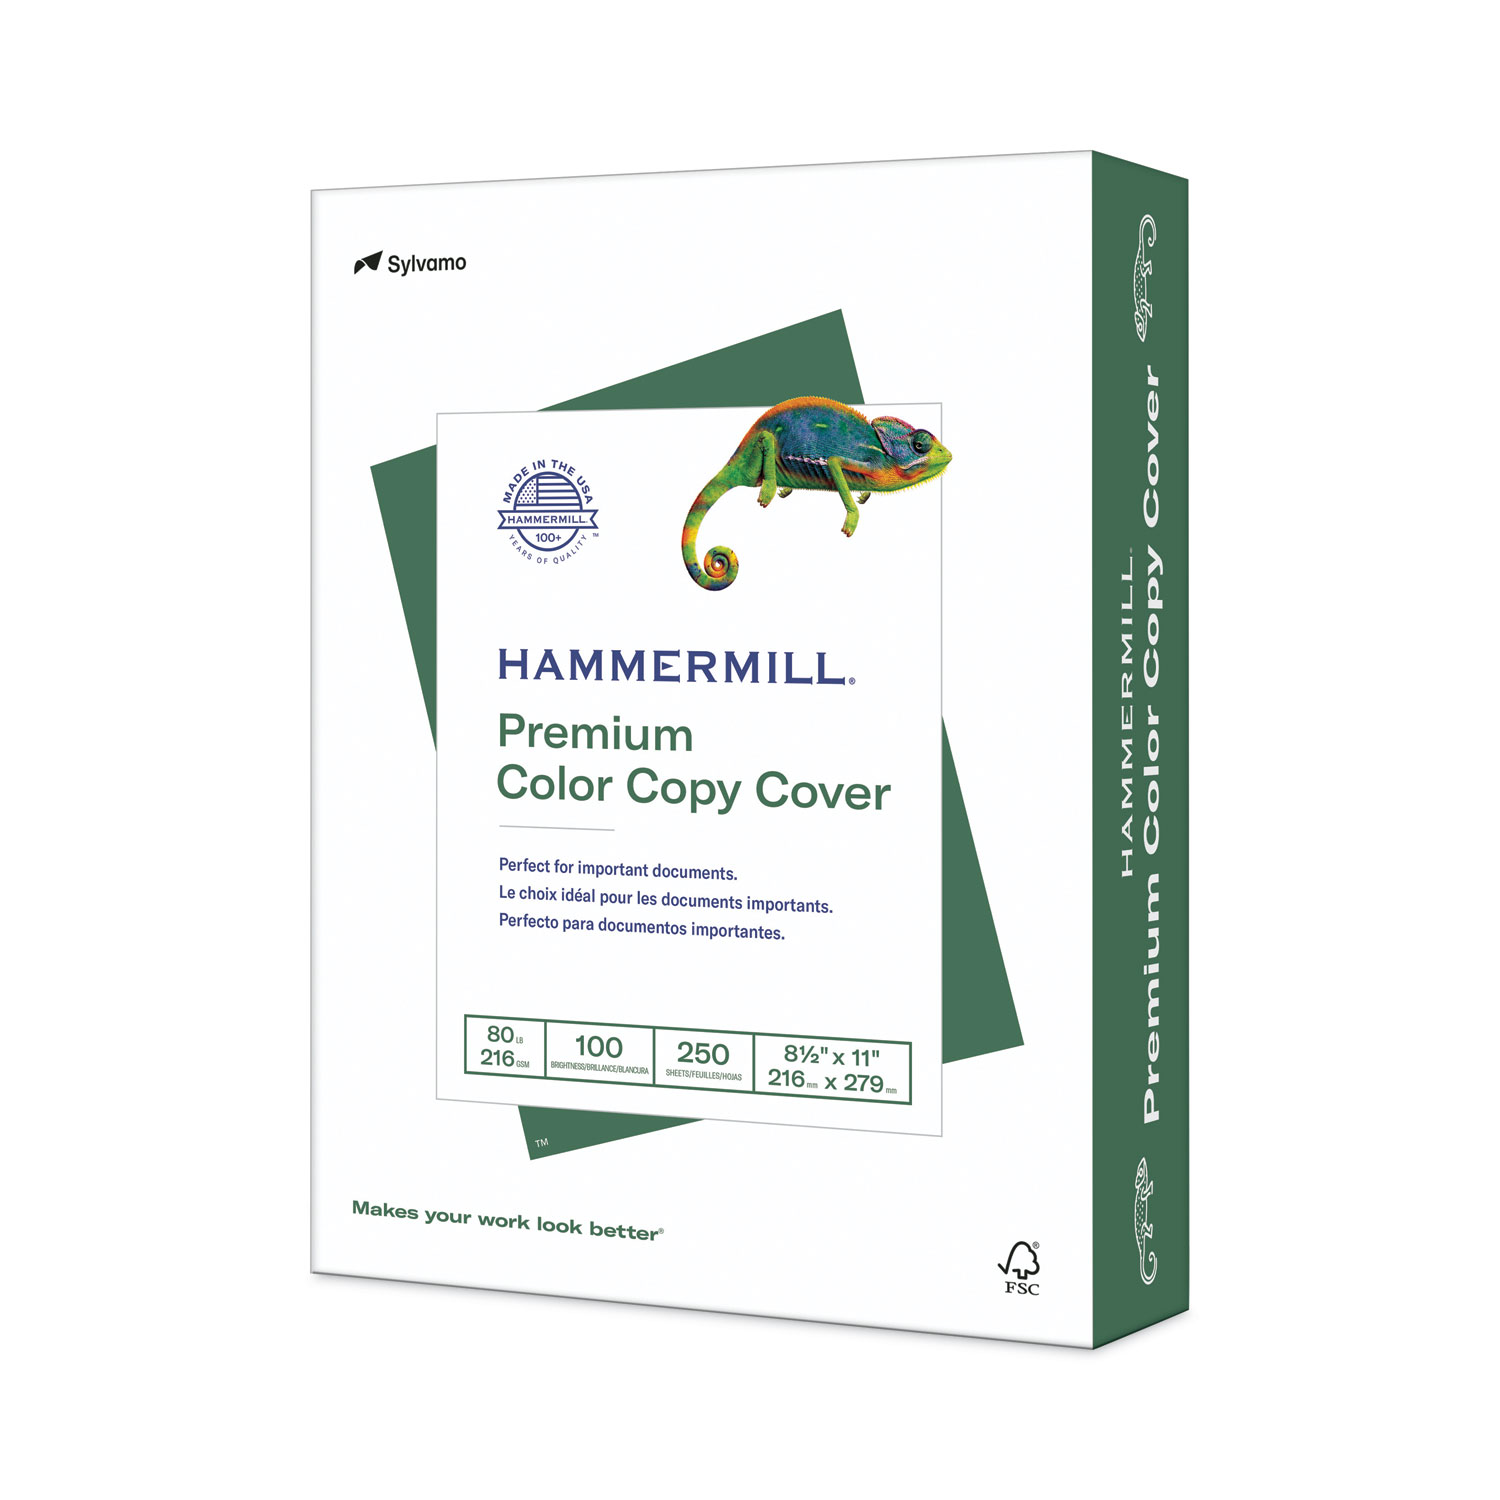 Hammermill Color Copy Digital Cover Stock 80 lbs. 8-1/2 x 11 White 250 Sheets